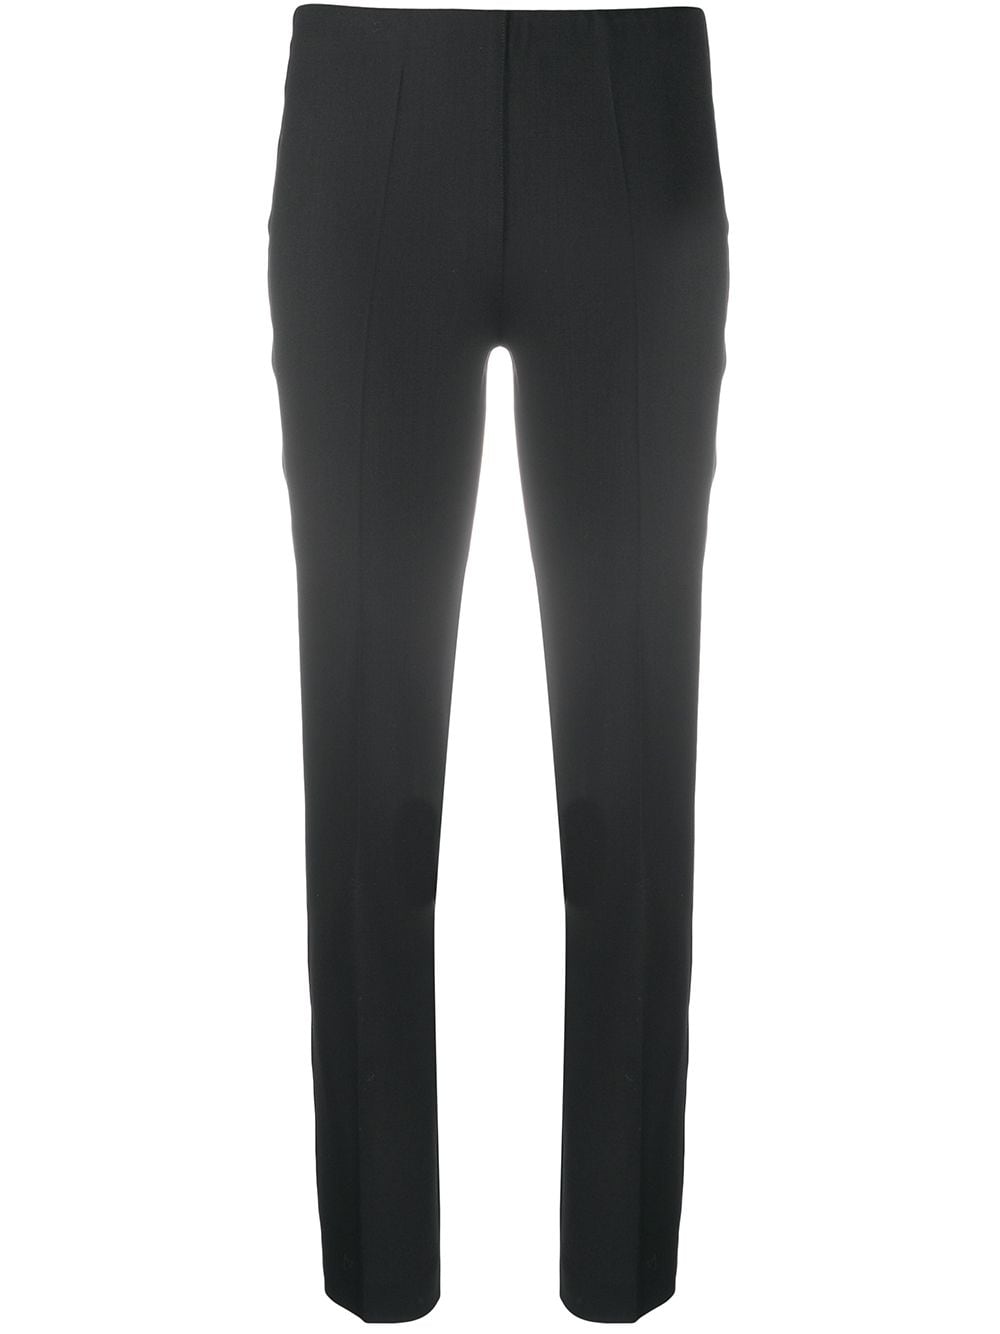 P.A.R.O.S.H. Slim Fit Cropped Trousers - Farfetch